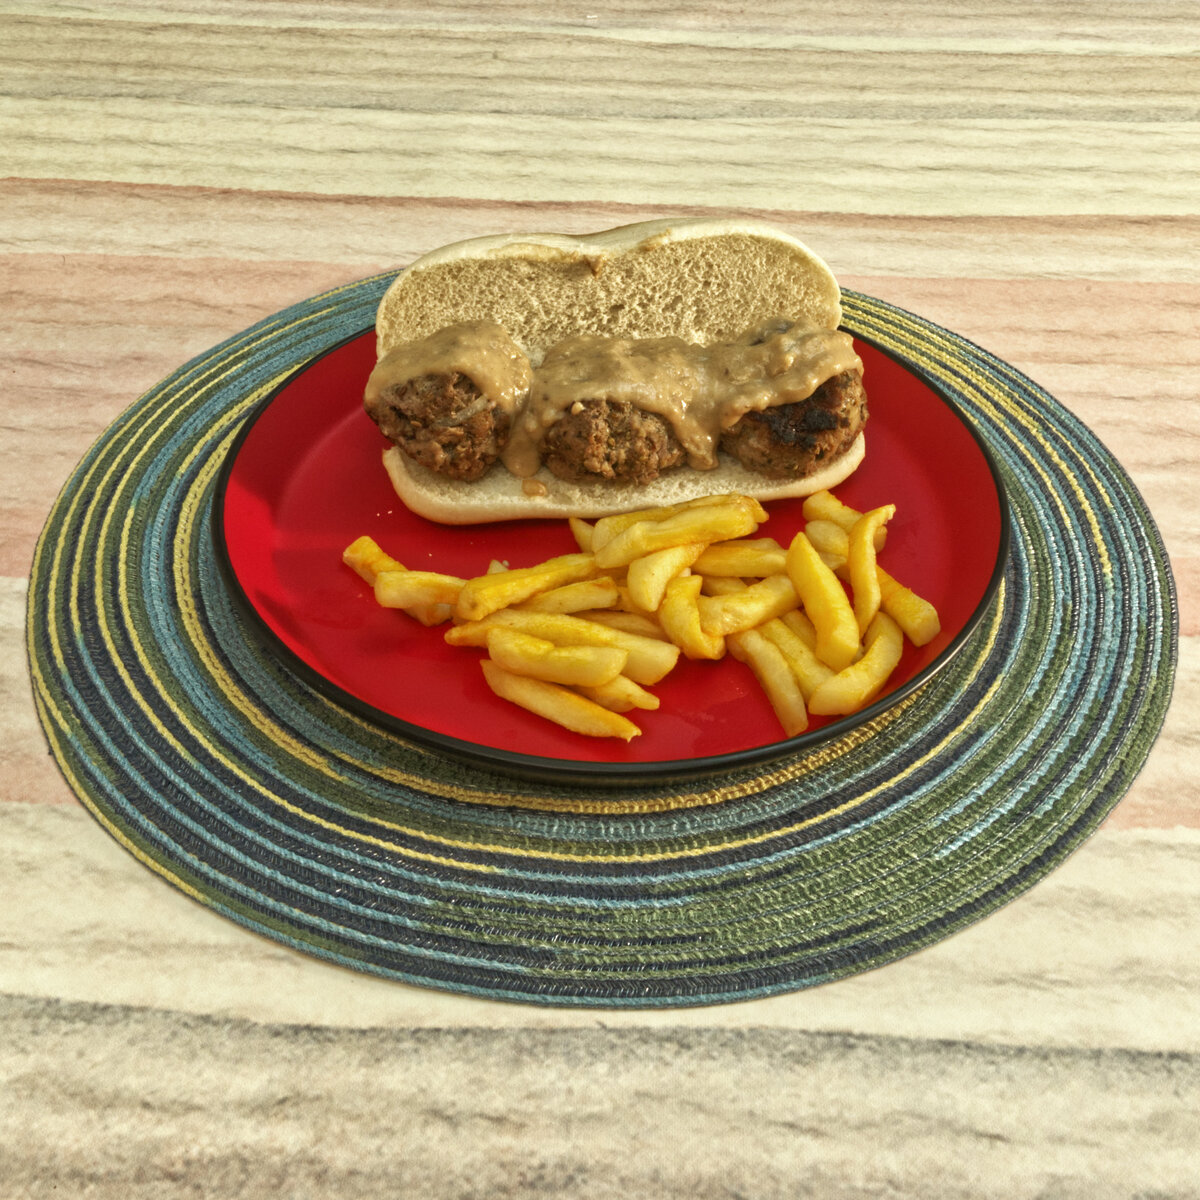 Beef and Pork Meatball Sandwich with French Fries